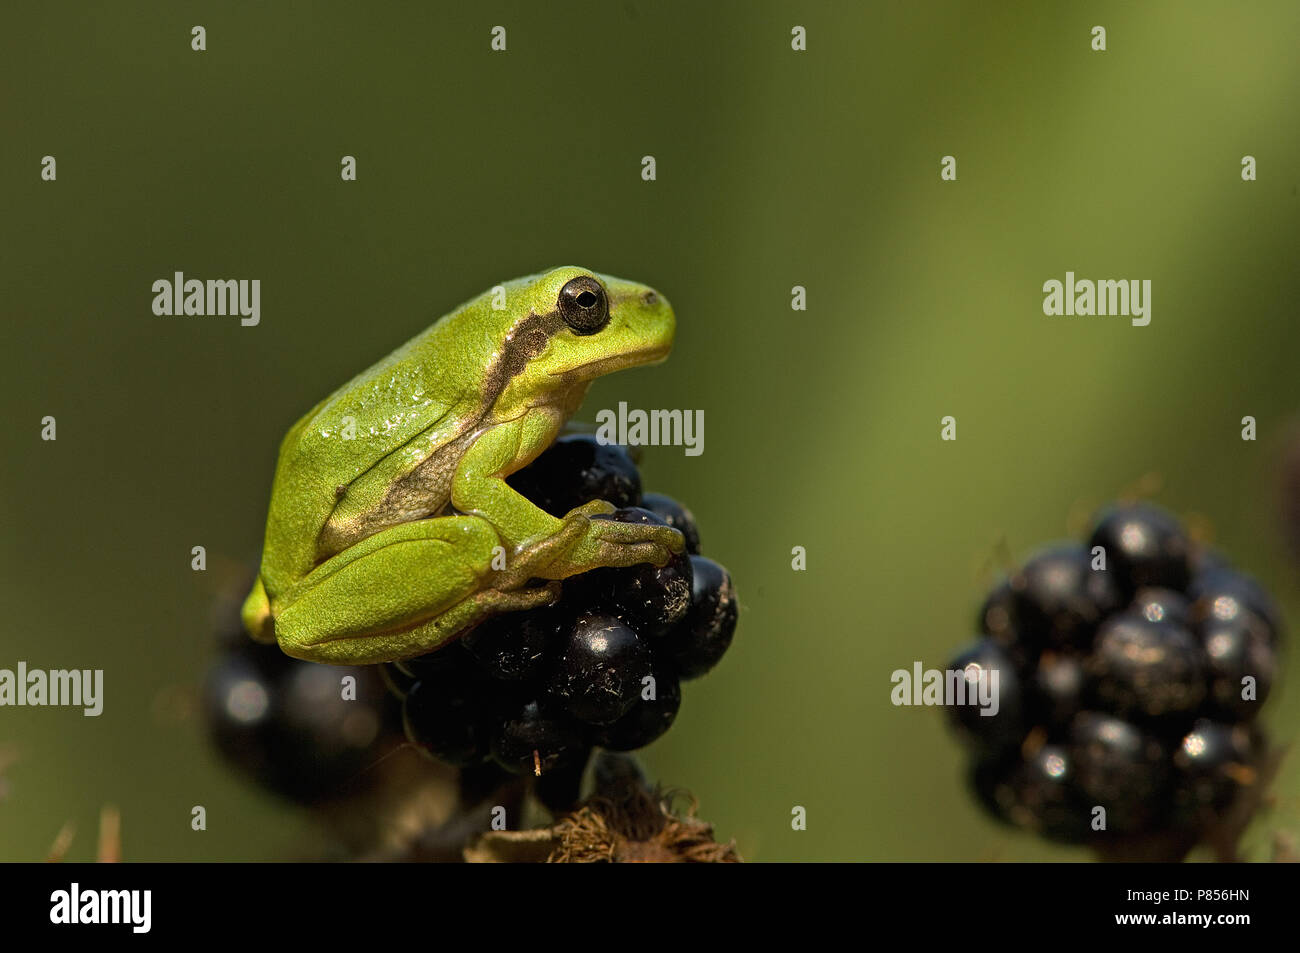 Green tree frog in the Netherlands Stock Photo